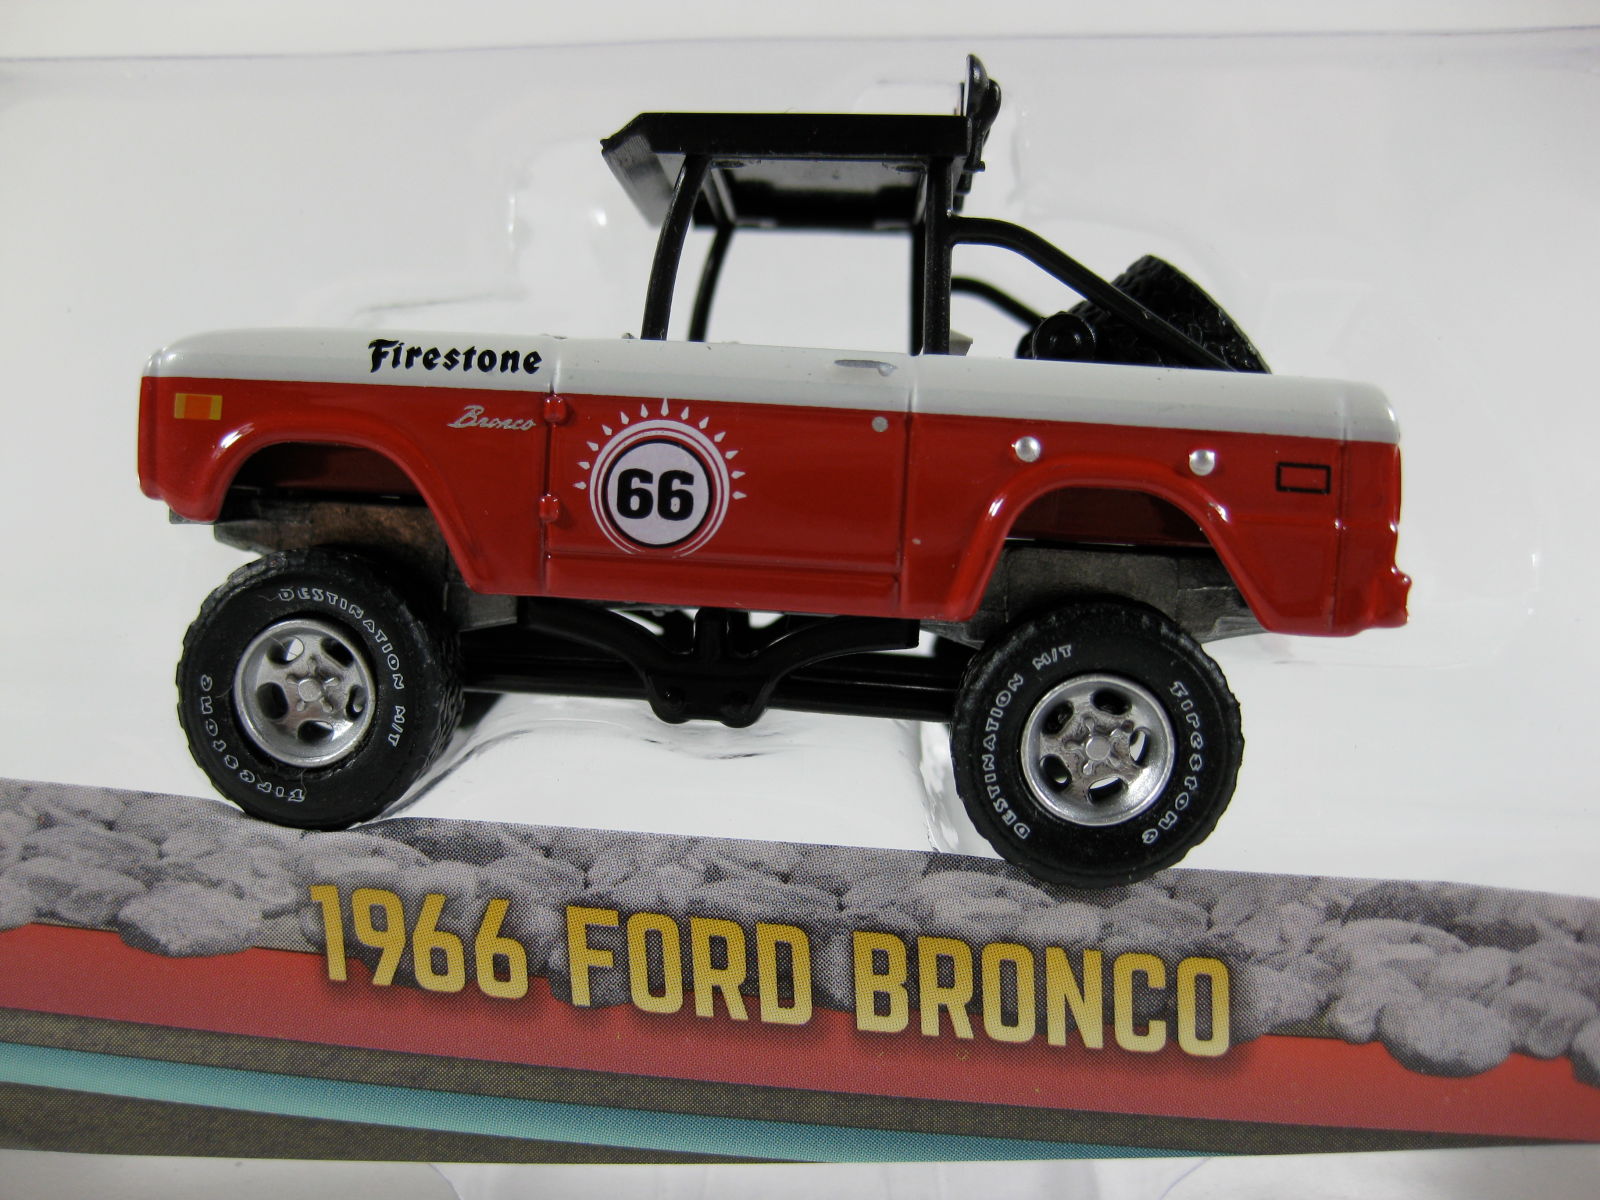 Illustration for article titled A BRONCO  A TRAILDUSTER